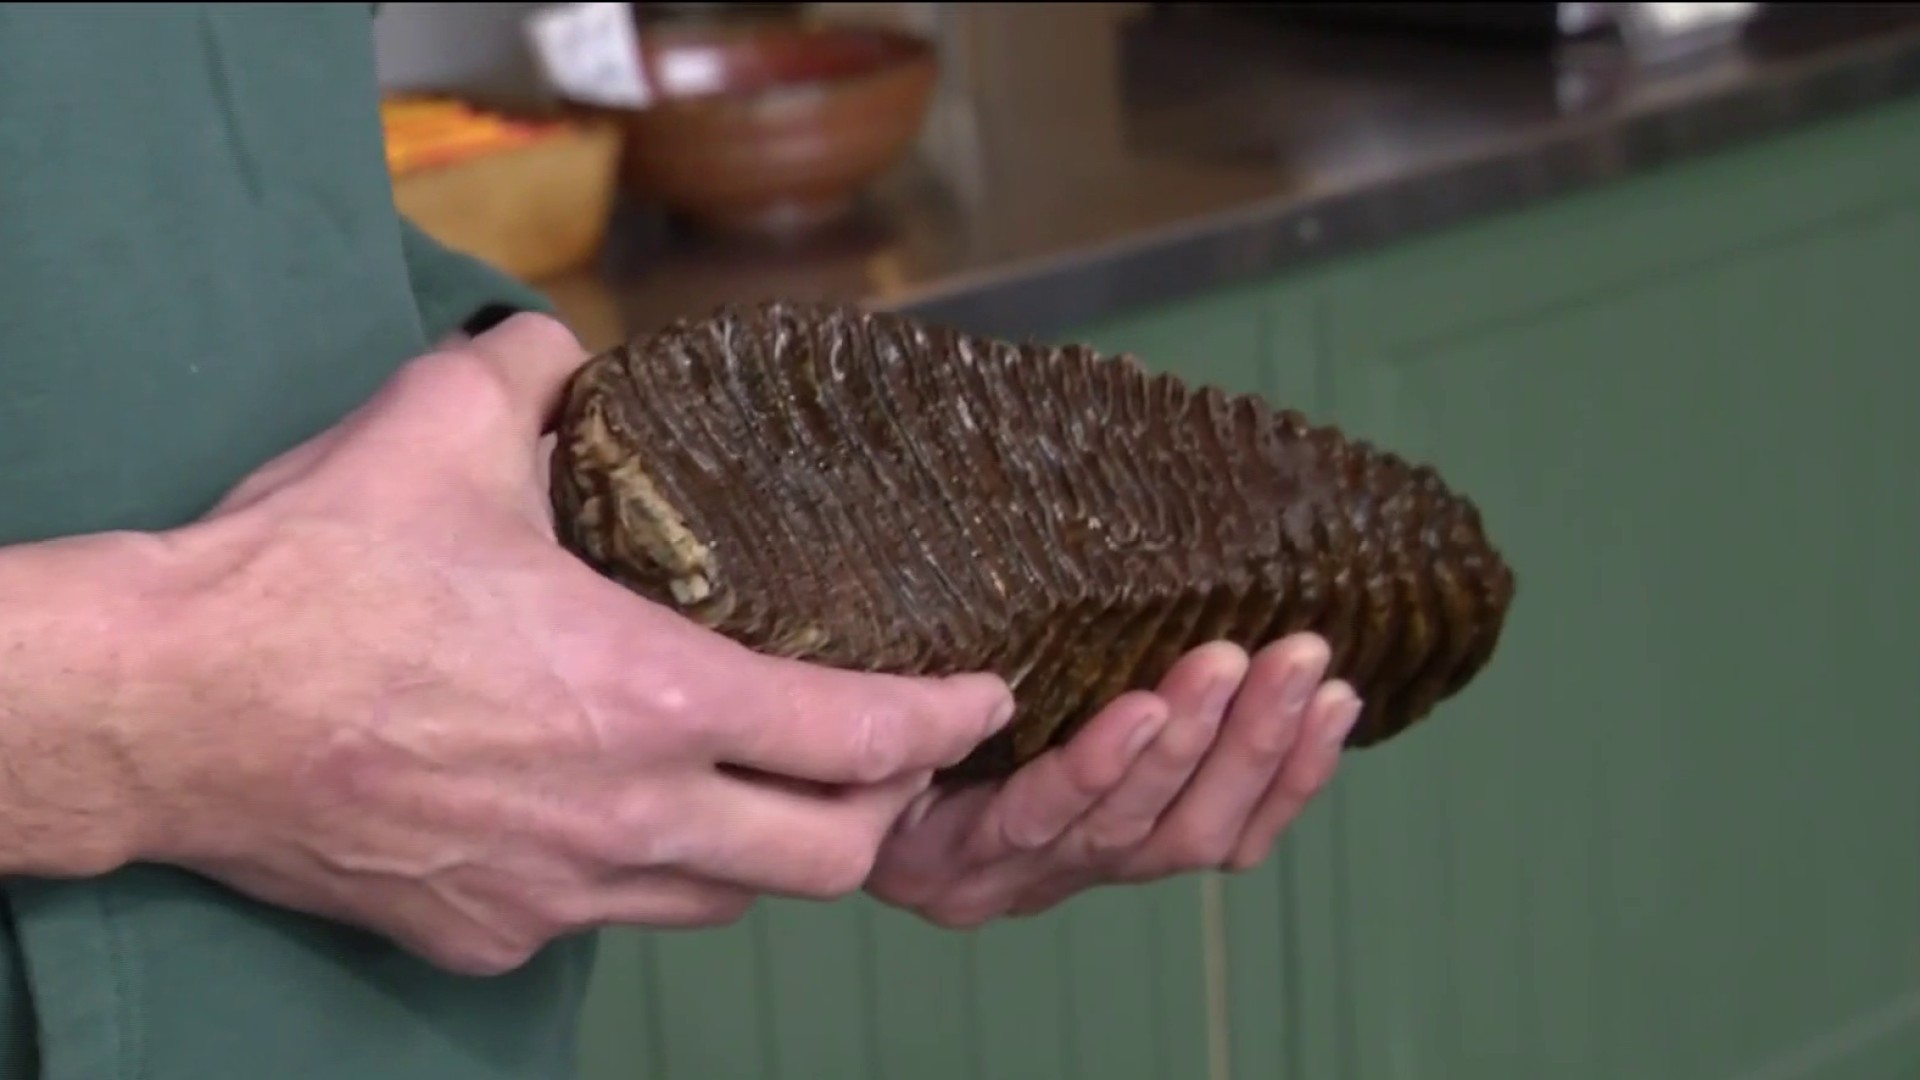 New England Fisherman to Auction Off Woolly Mammoth Tooth He Caught to Help Ukraine